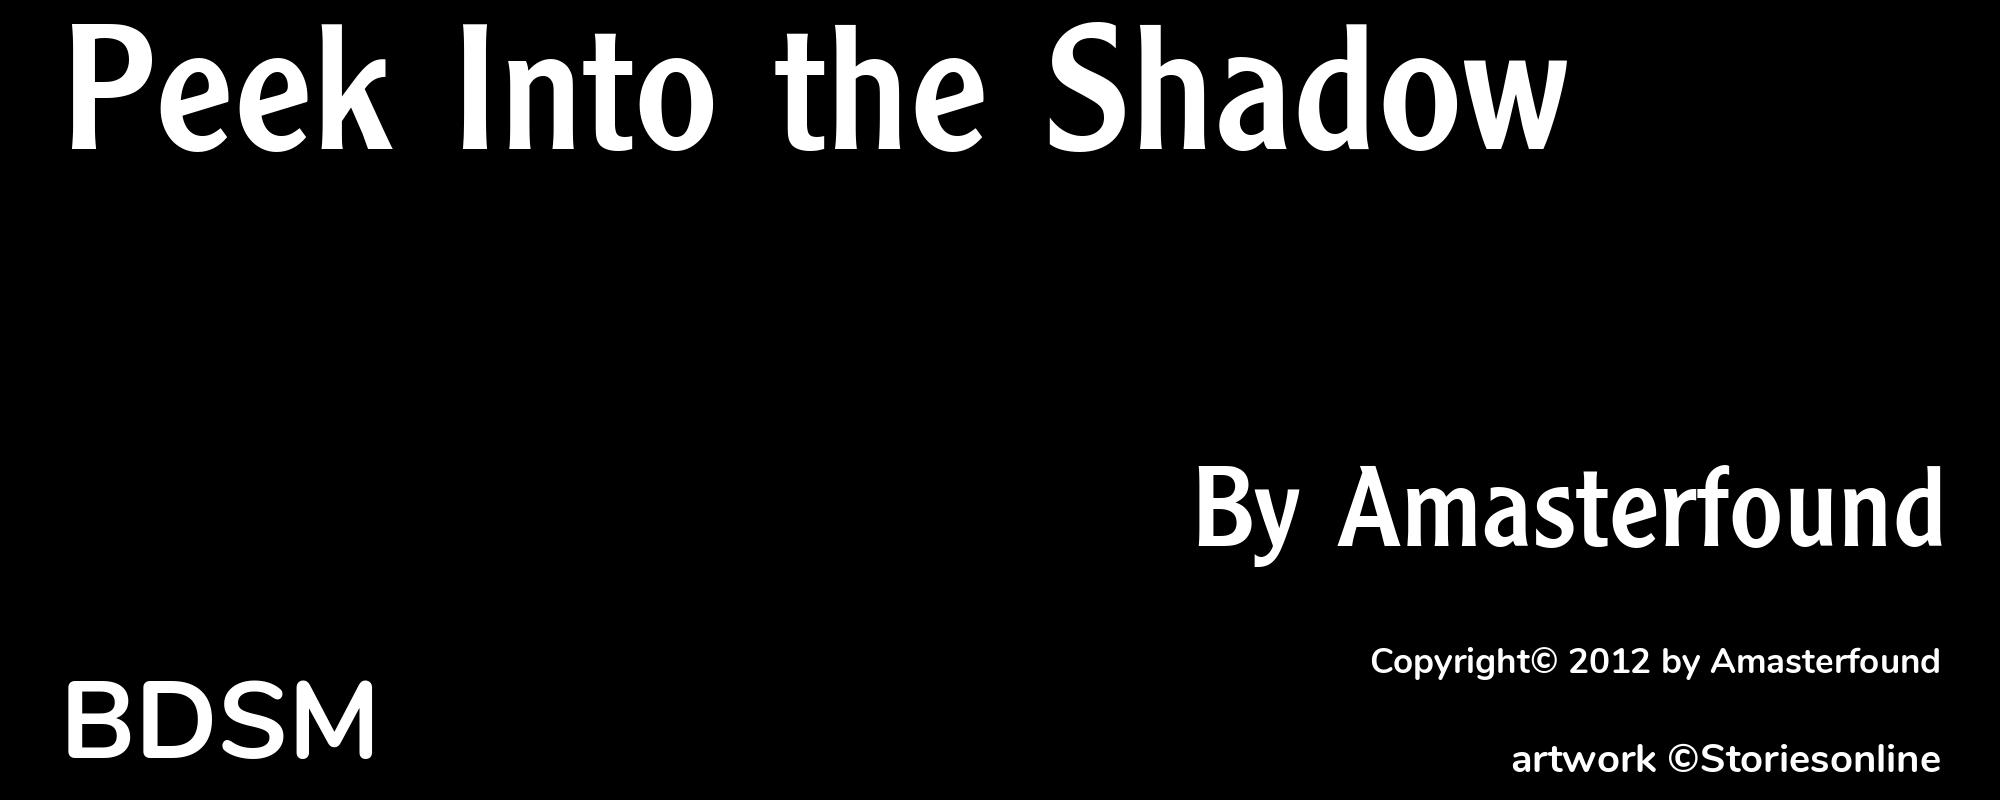 Peek Into the Shadow - Cover